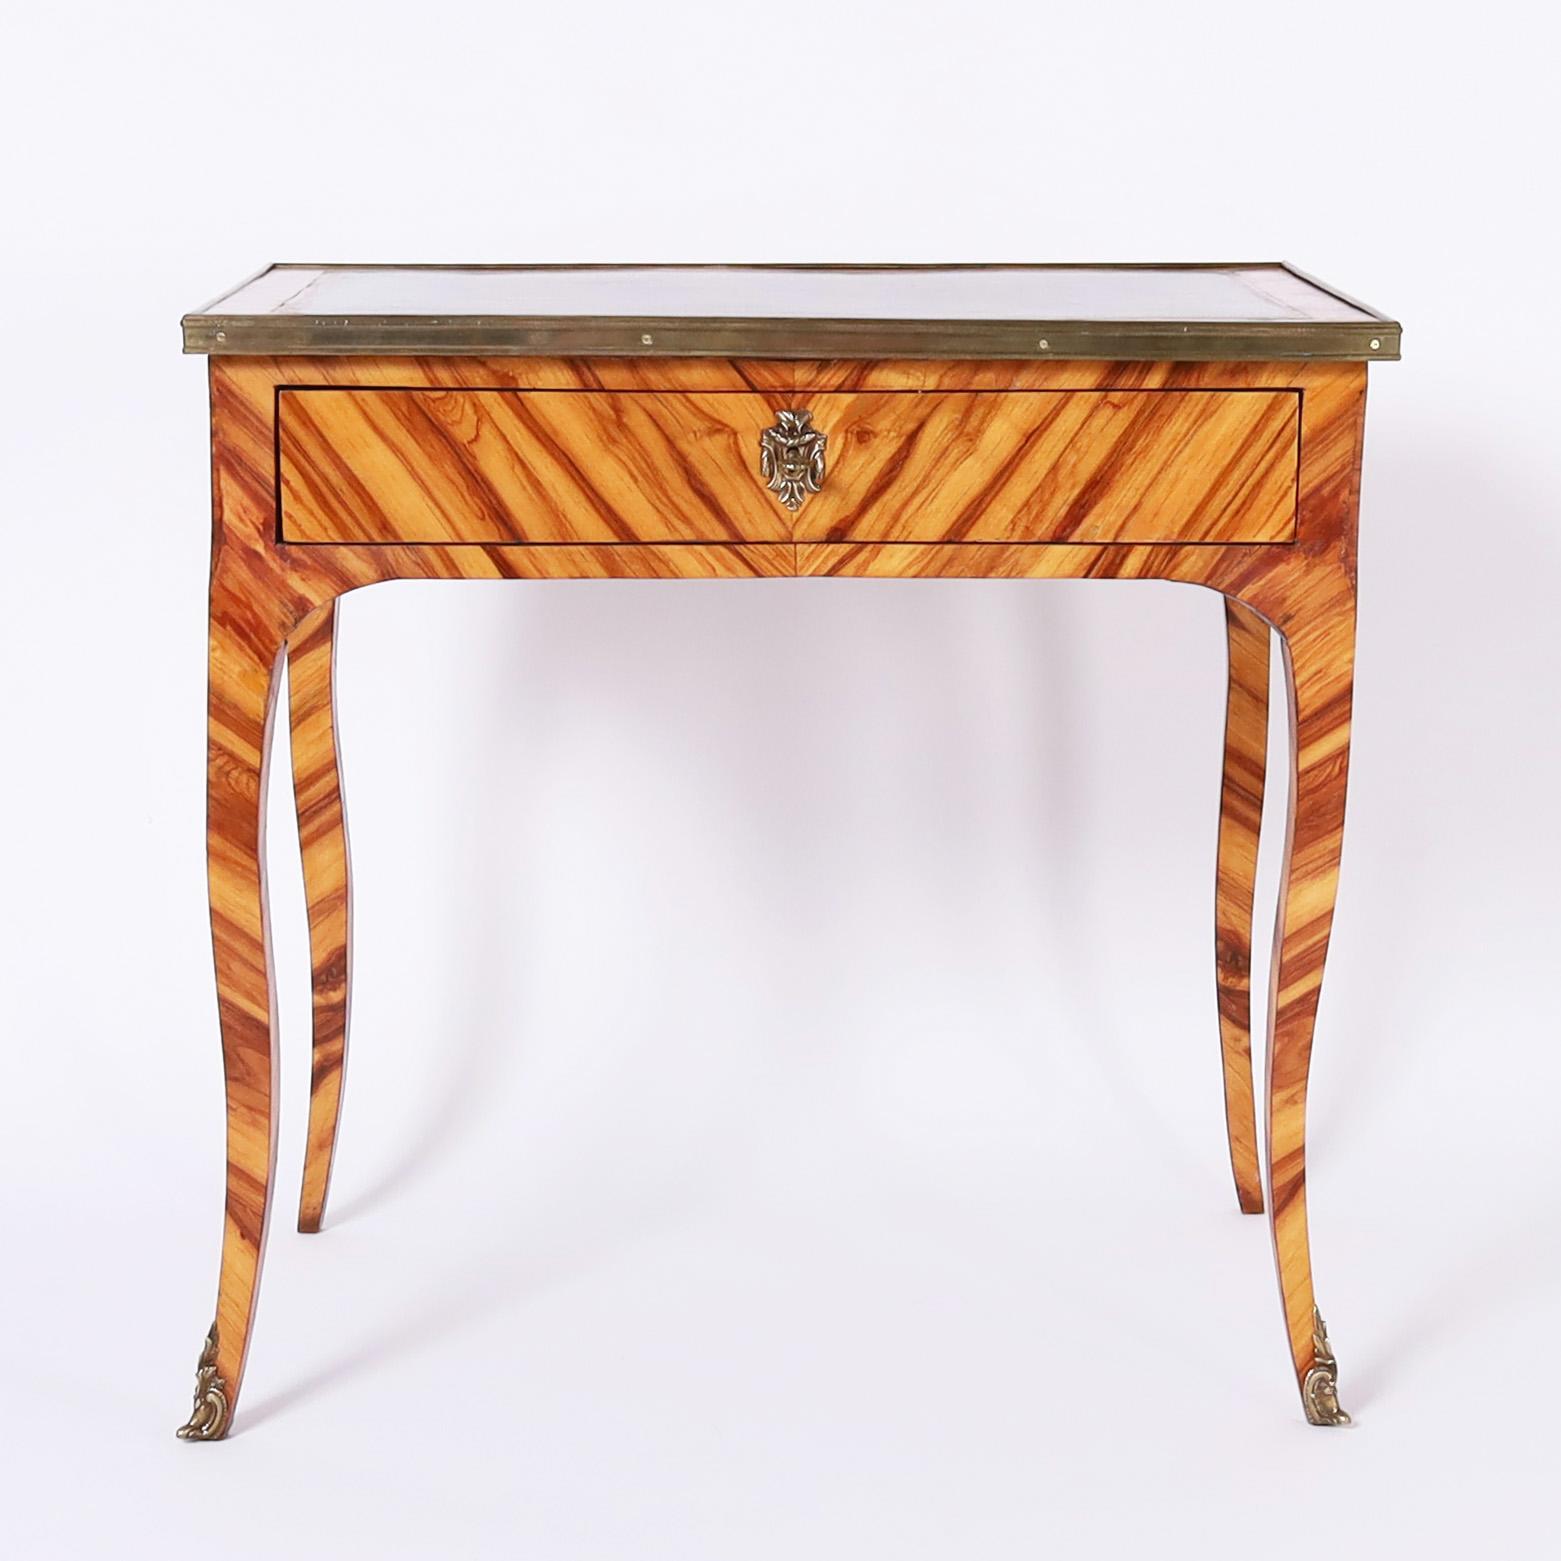 Rare and remarkable Louis XV style ladies writing desk handcrafted in exotic cocobola wood with a leather top on a one drawer case over elegant cabriole legs with ormolu front feet. 